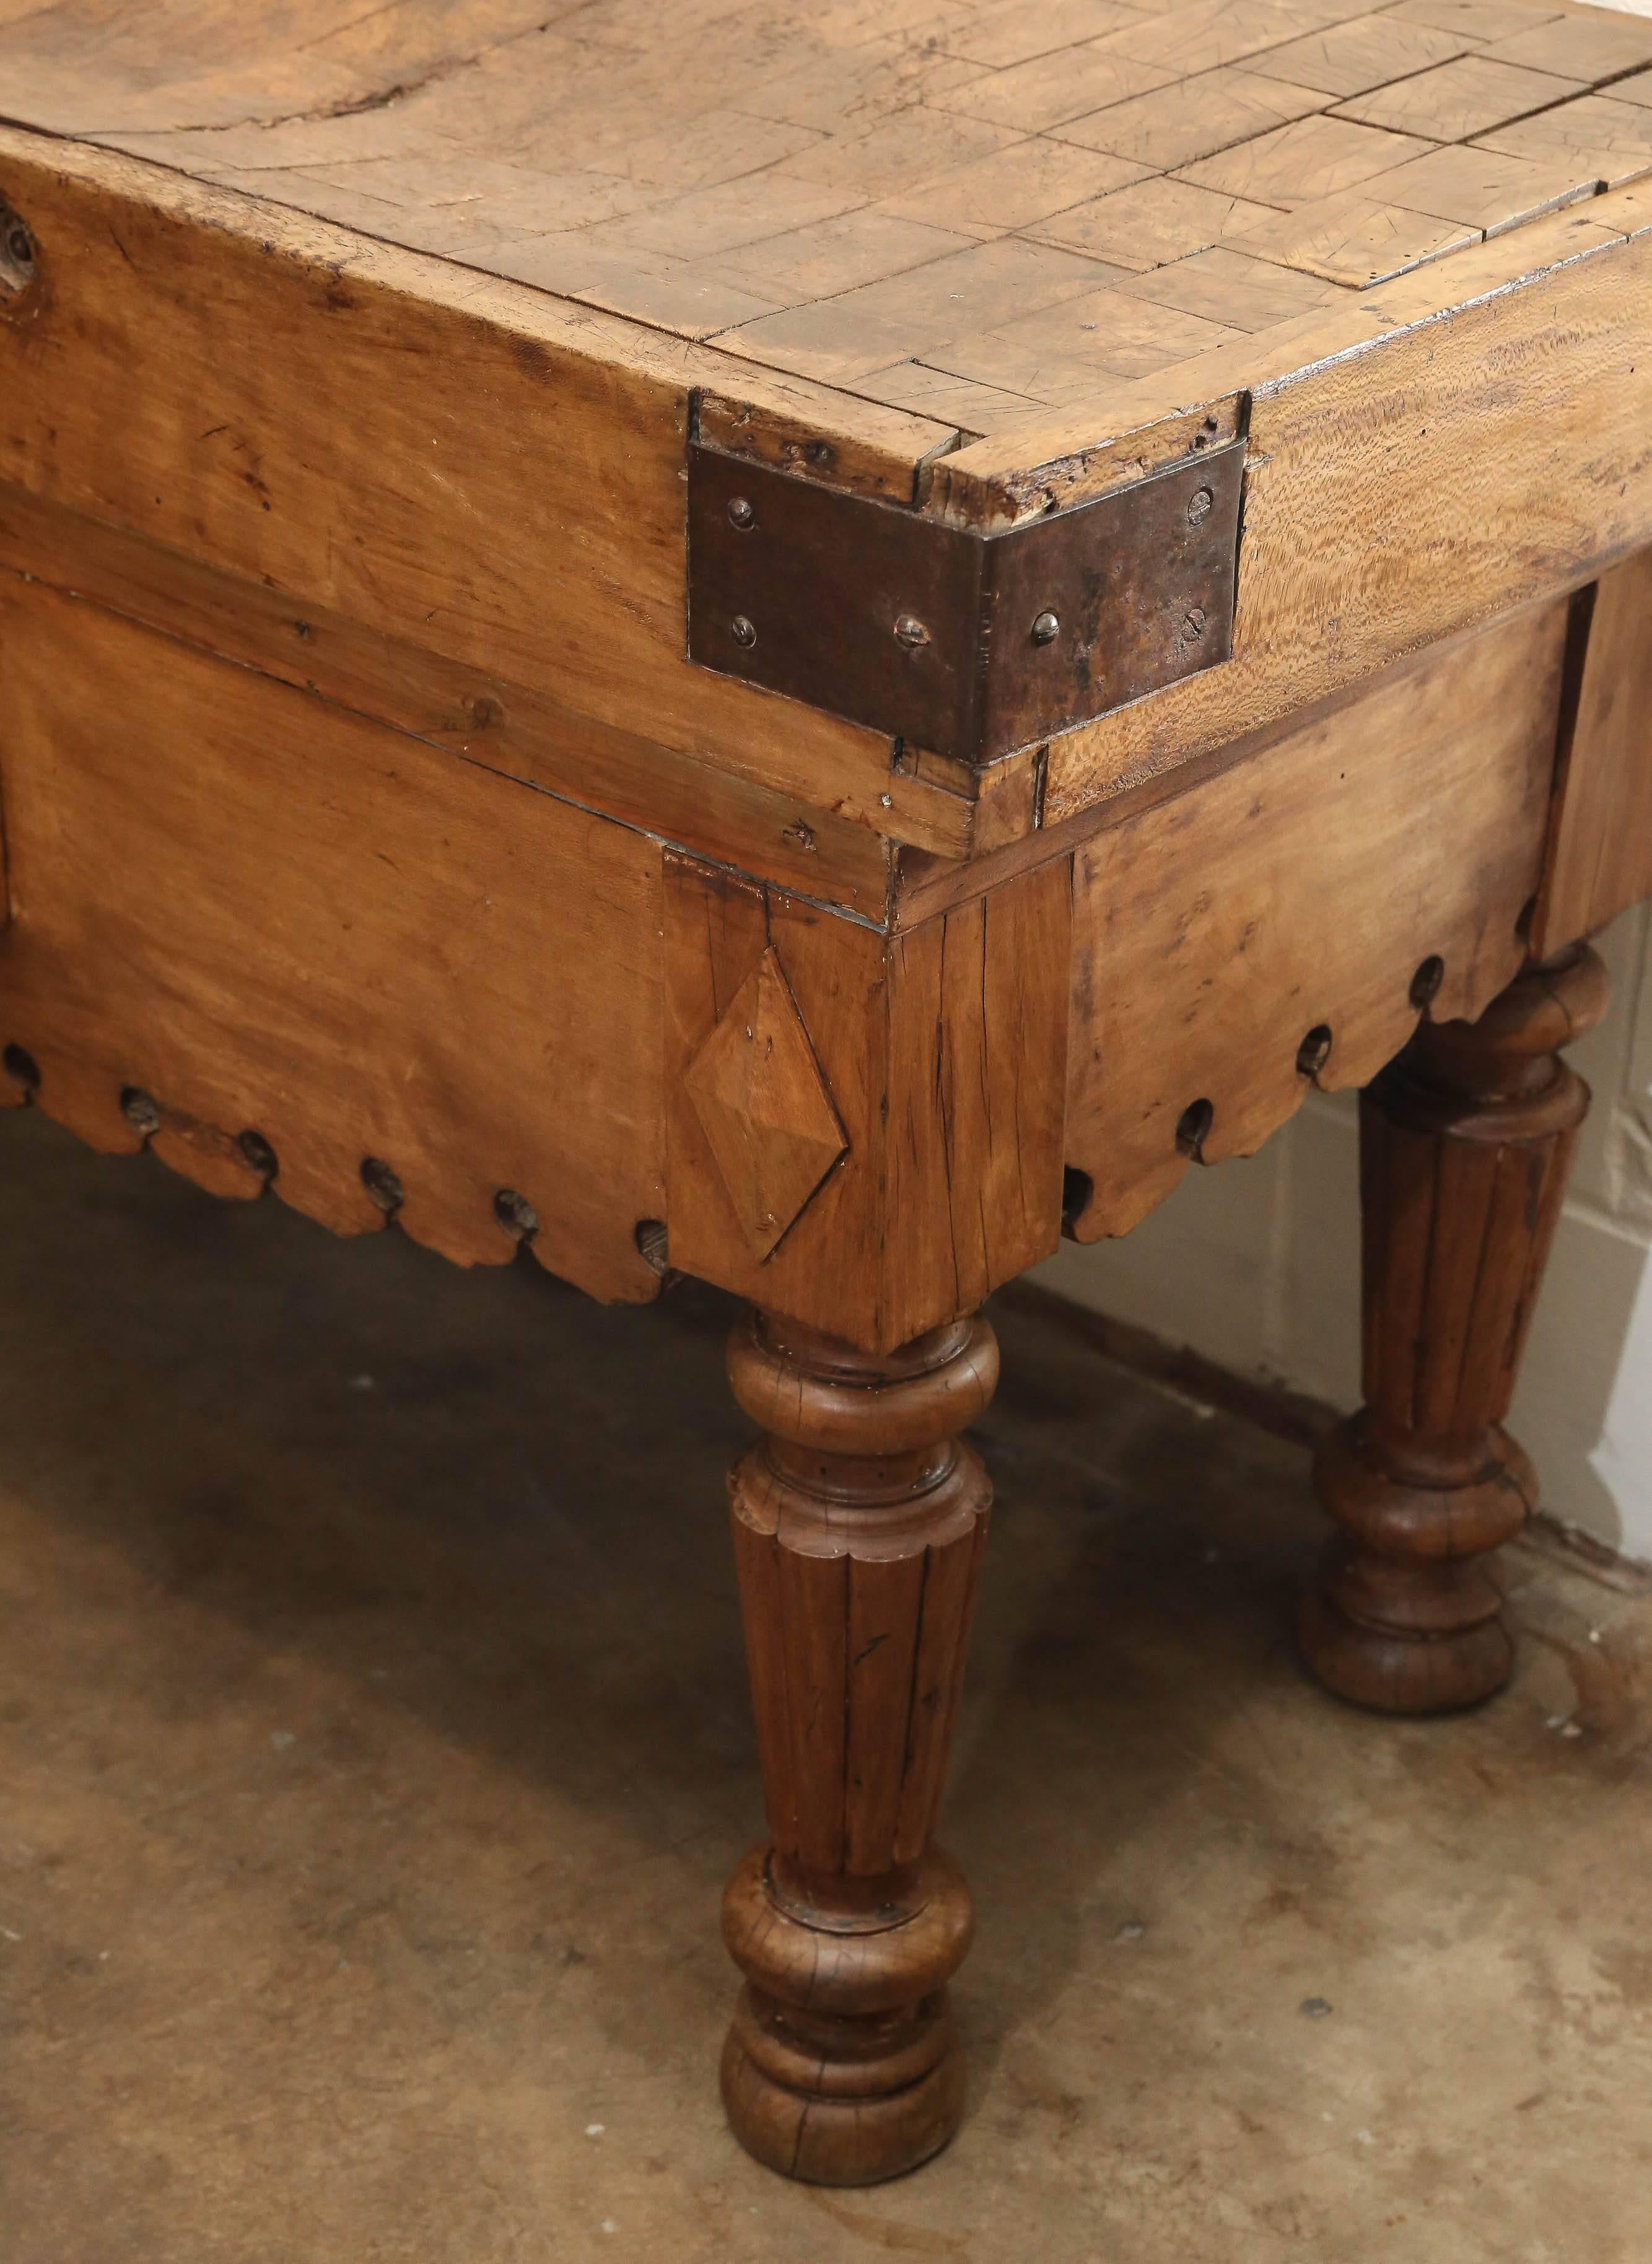 19th century butcher table with scalloped edge and original top. Found in France.